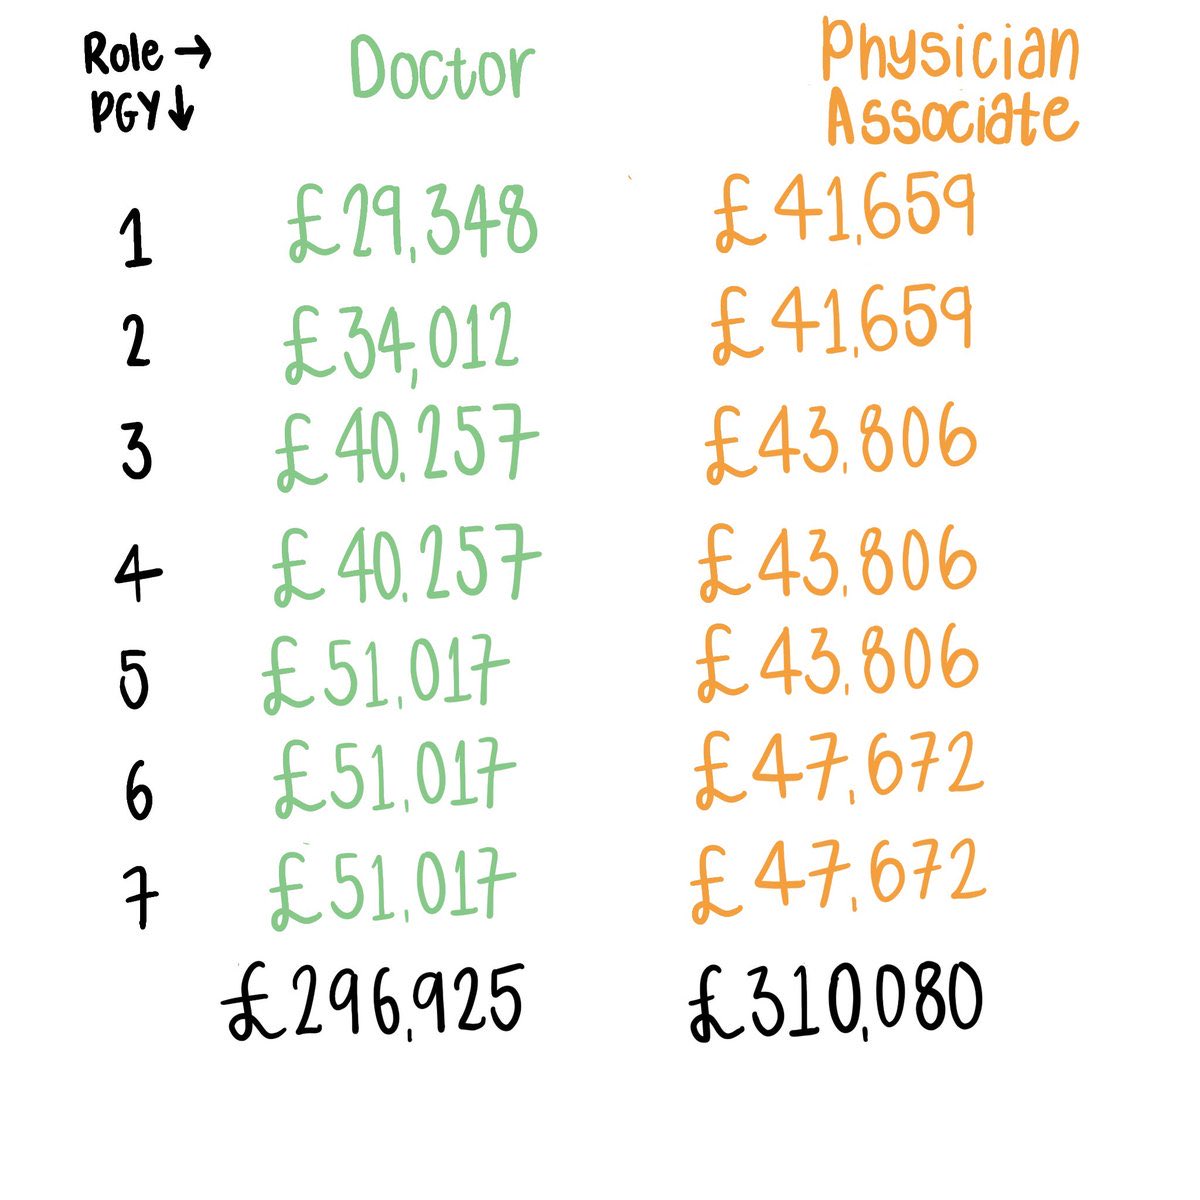 Dear Public, Did you know Physician Associates get paid more than junior doctors even though they have less training and depth of knowledge? Even though they can’t prescribe or request imaging? Why do you think that is? Curious to hear your thoughts.